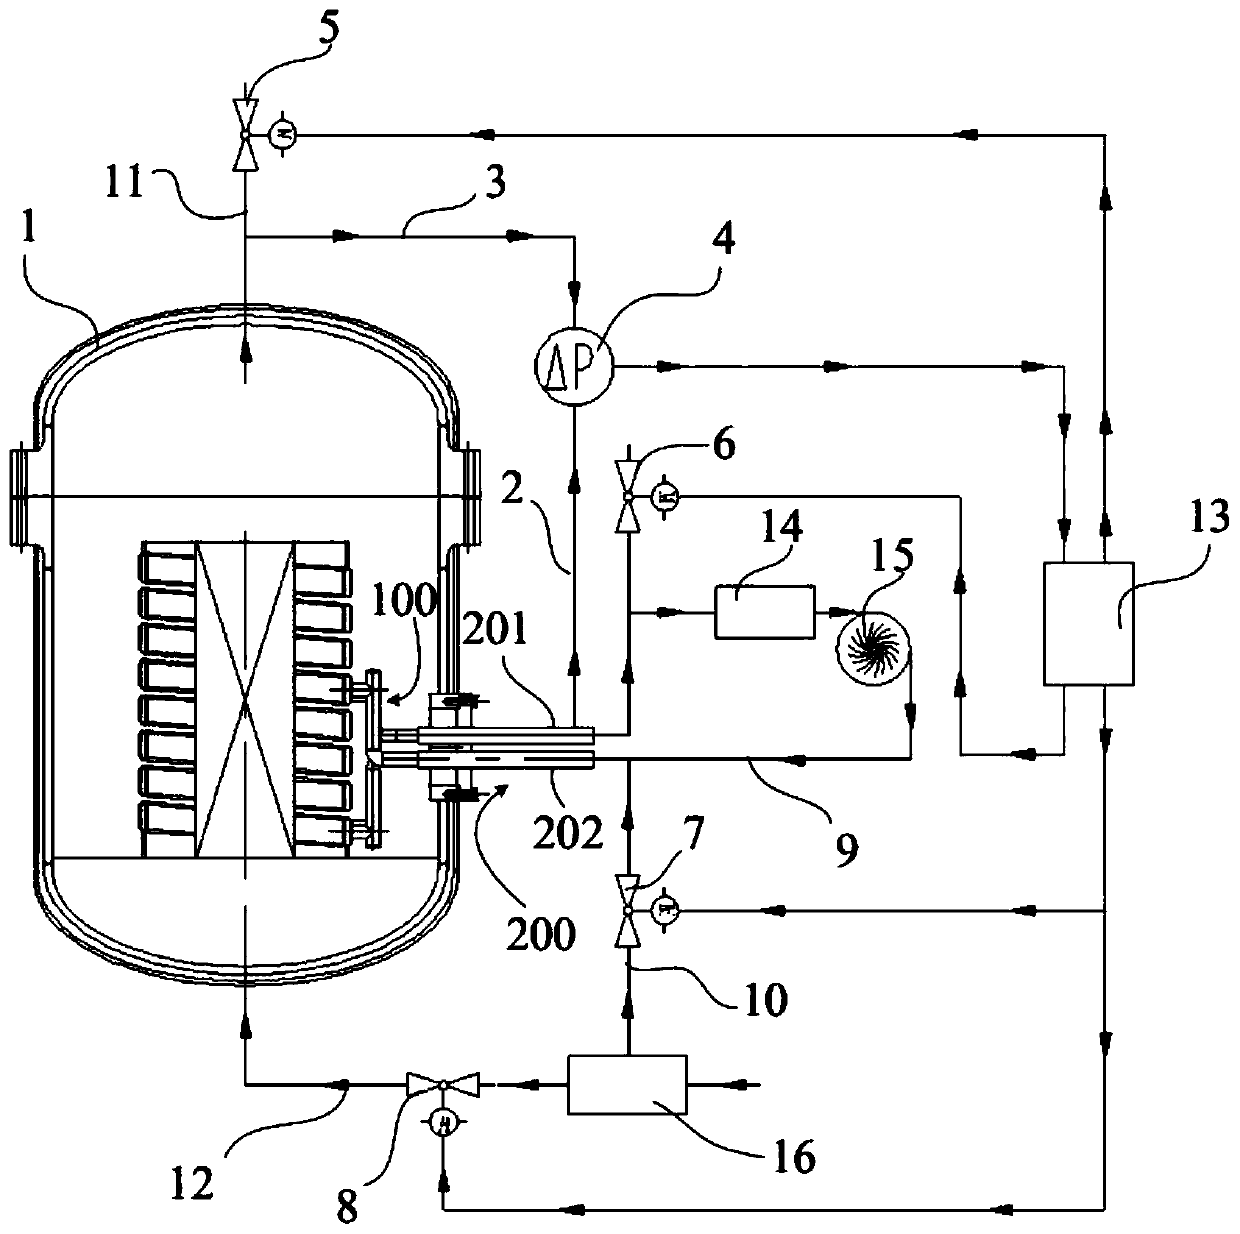 Induction coil cooling pressure-bearing system for induction heating equipment